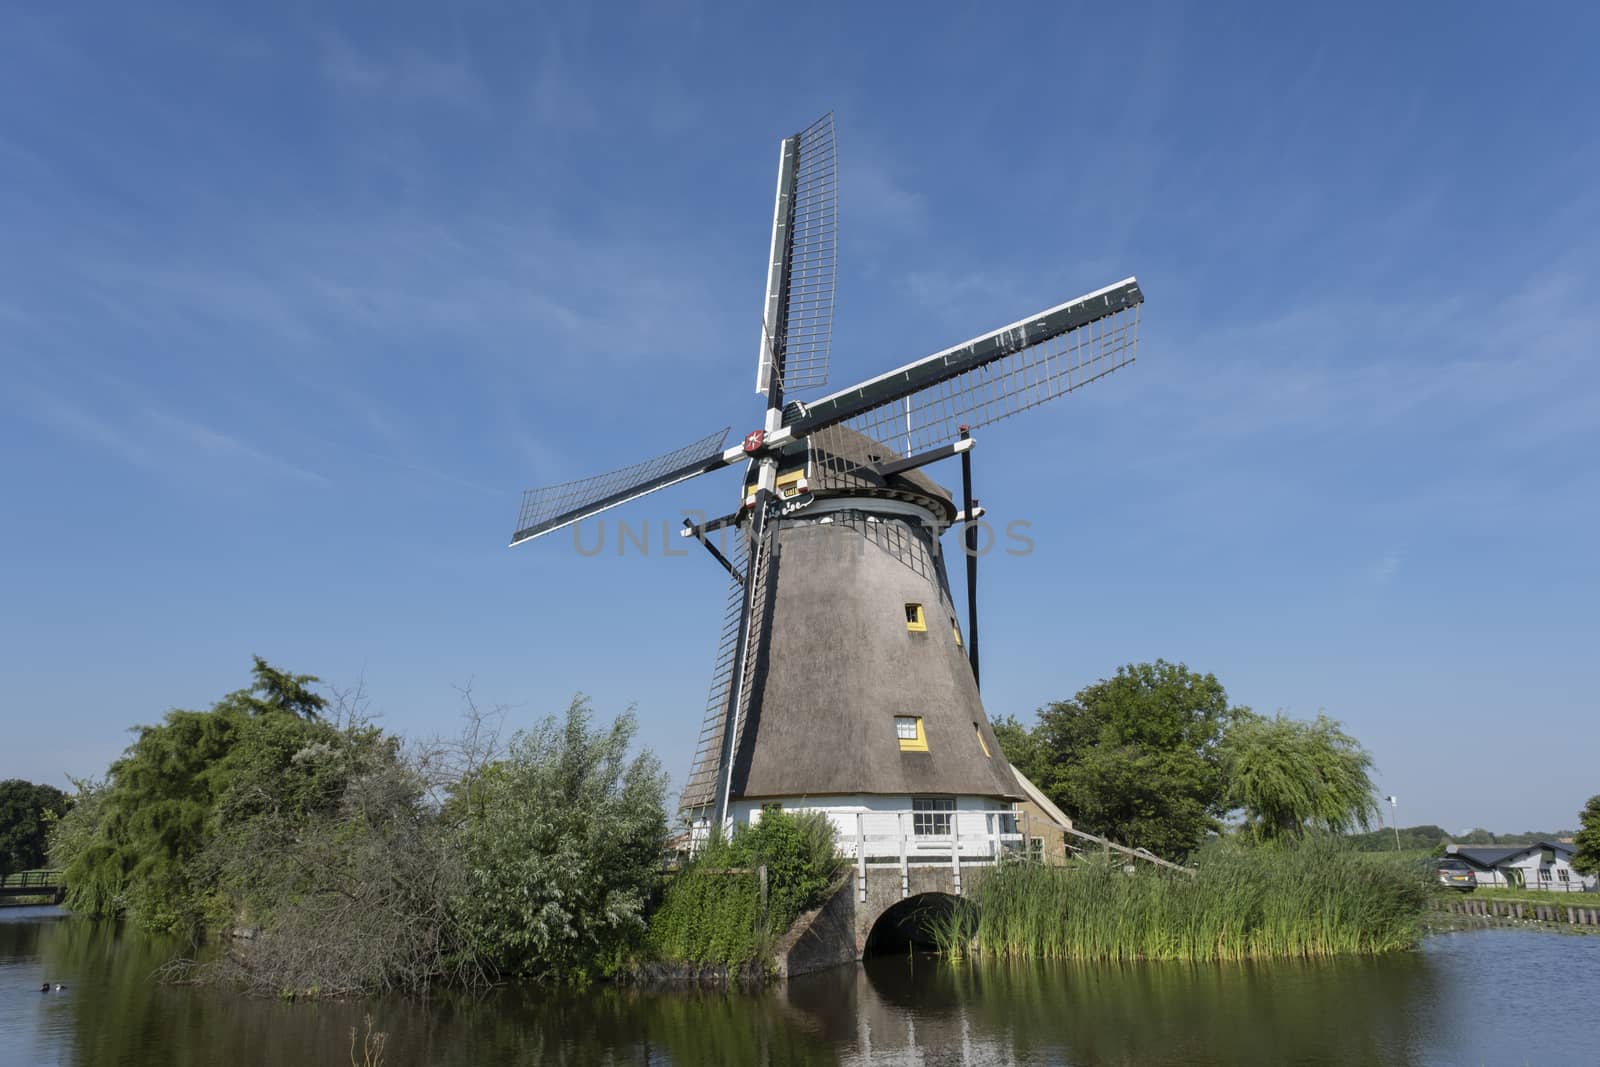 Traditional dutch windmill near the canal. Netherlands. by Tjeerdkruse